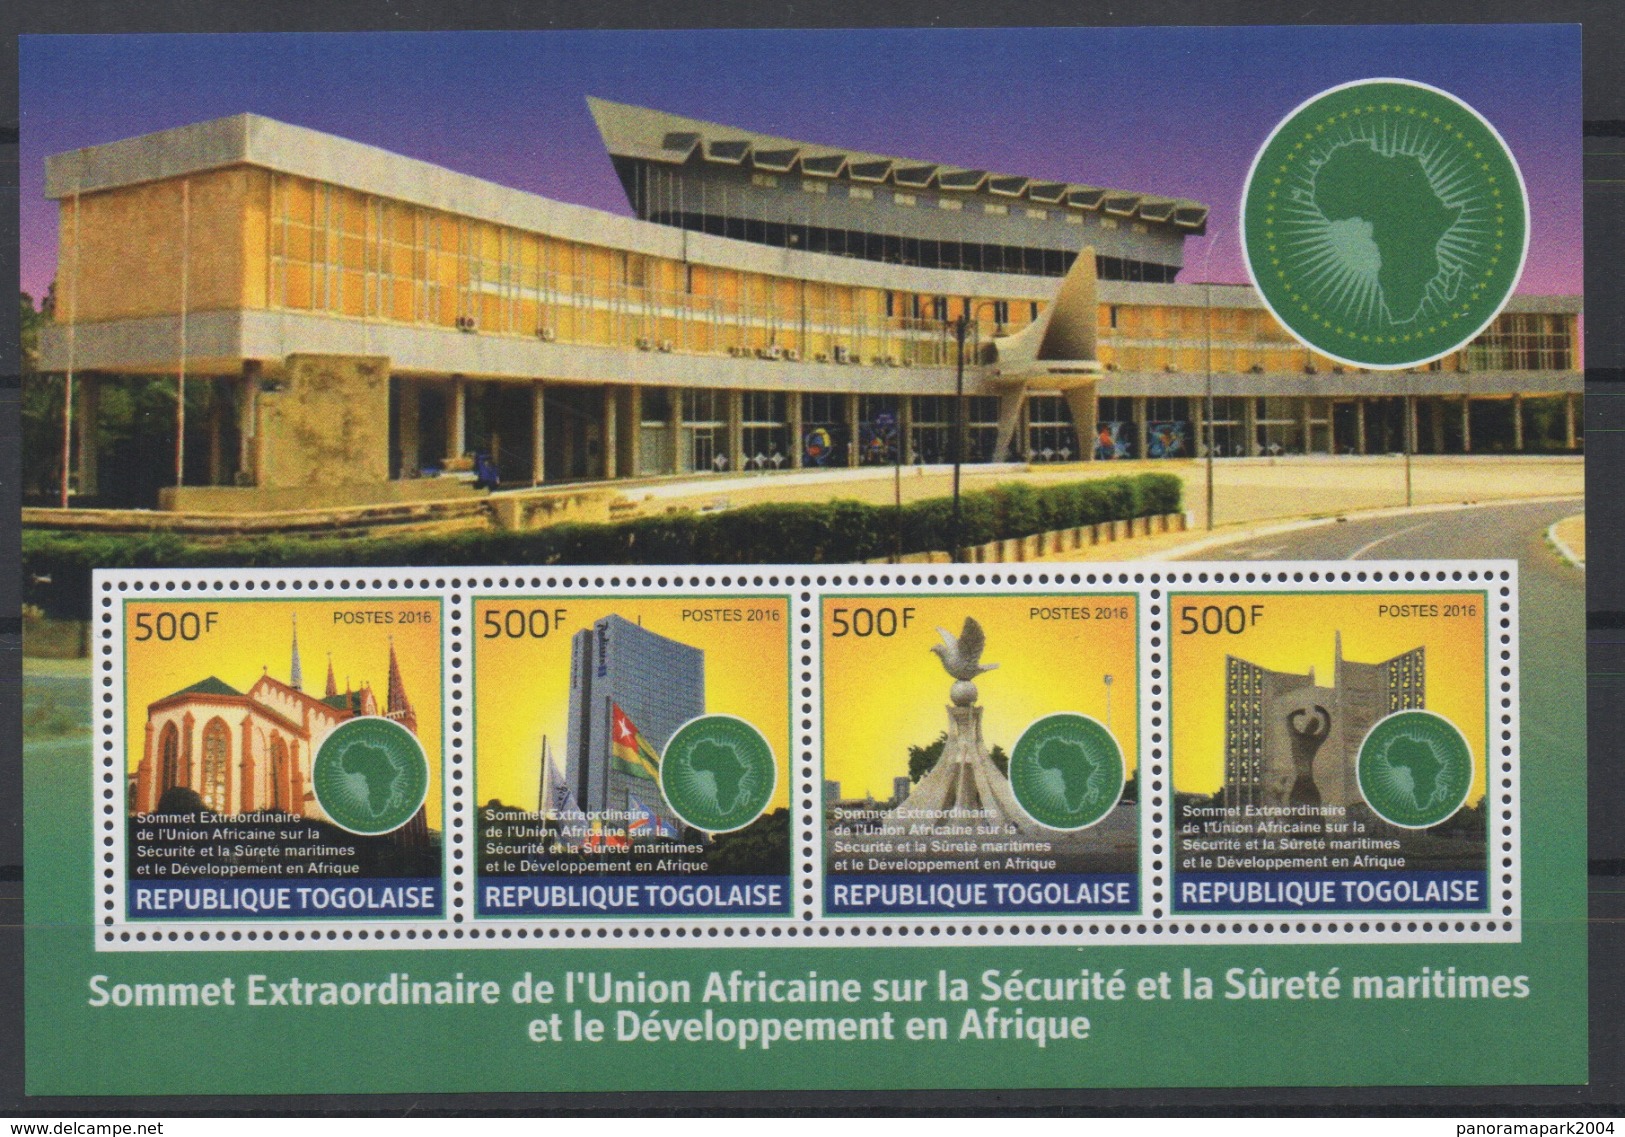 Togo 2016 - Mi. ? Sommet Union Africaine Africa Map Flag Drapeau Fahne 15 Octobre OFFICIAL Local Issue ** - Timbres